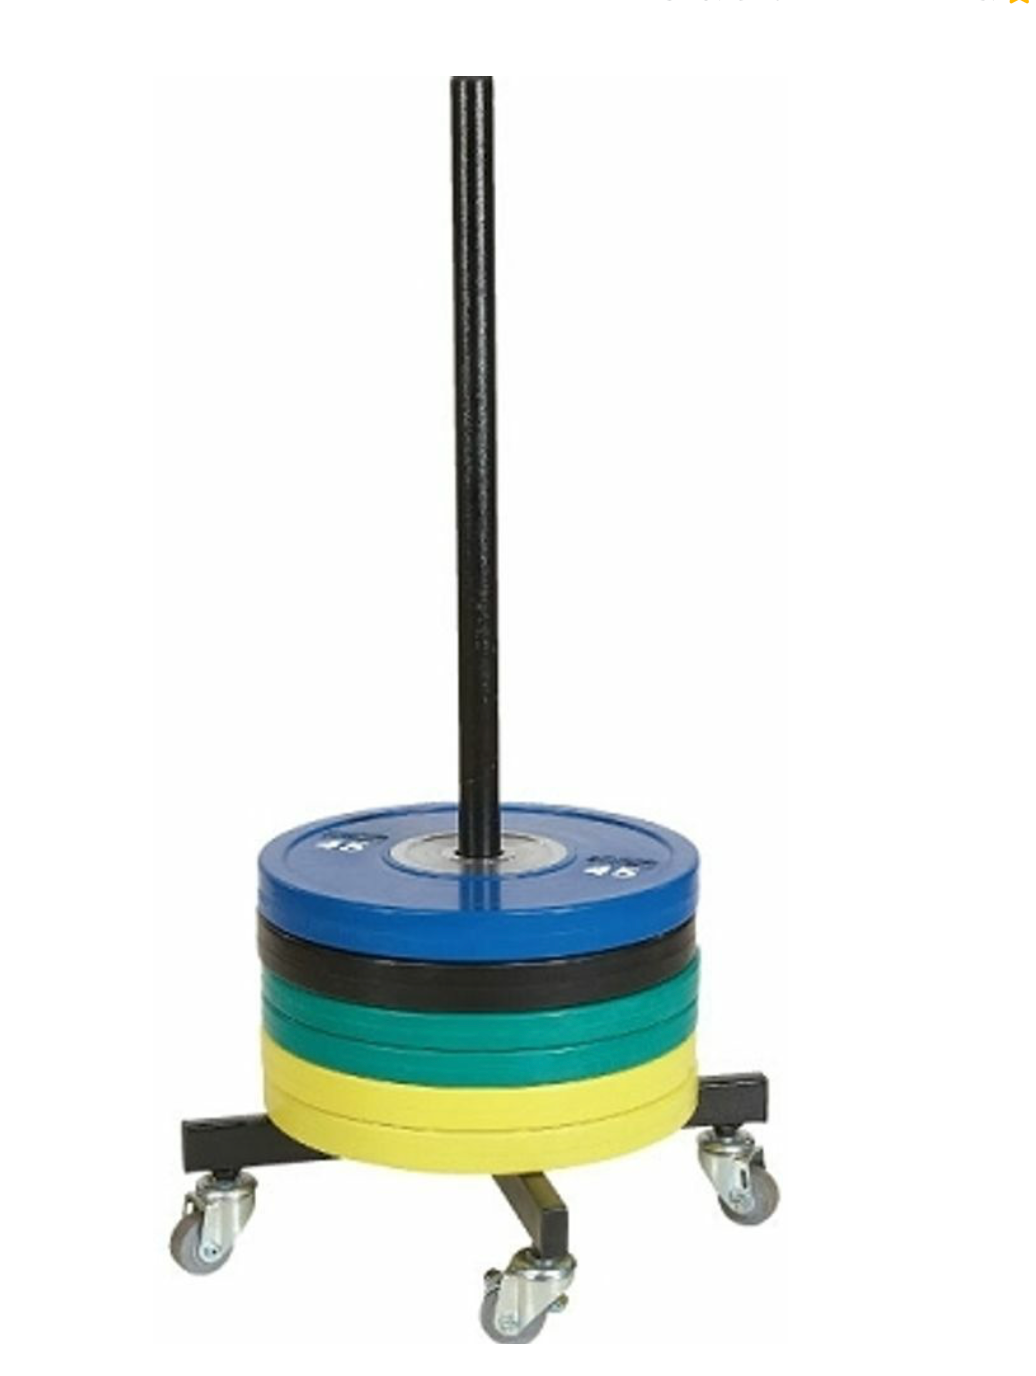 MORGAN BUMPER PLATE STACKER WITH WHEELS